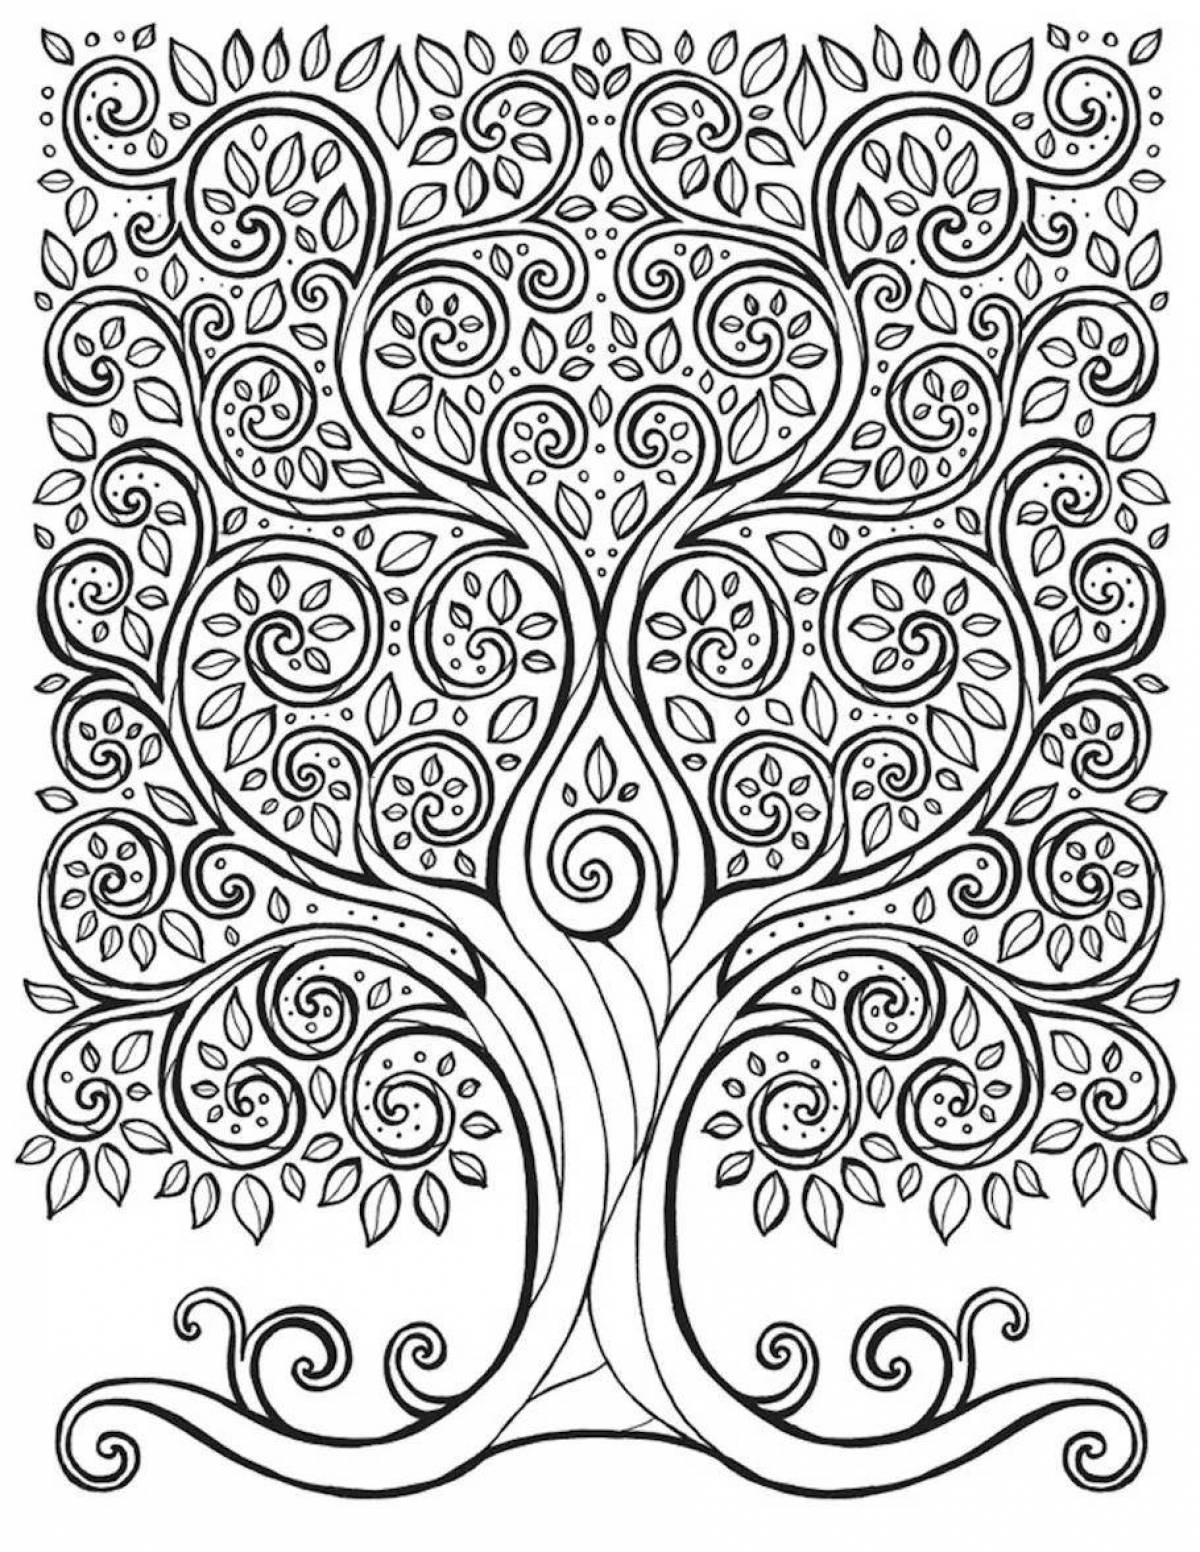 Flowering tree of life coloring page